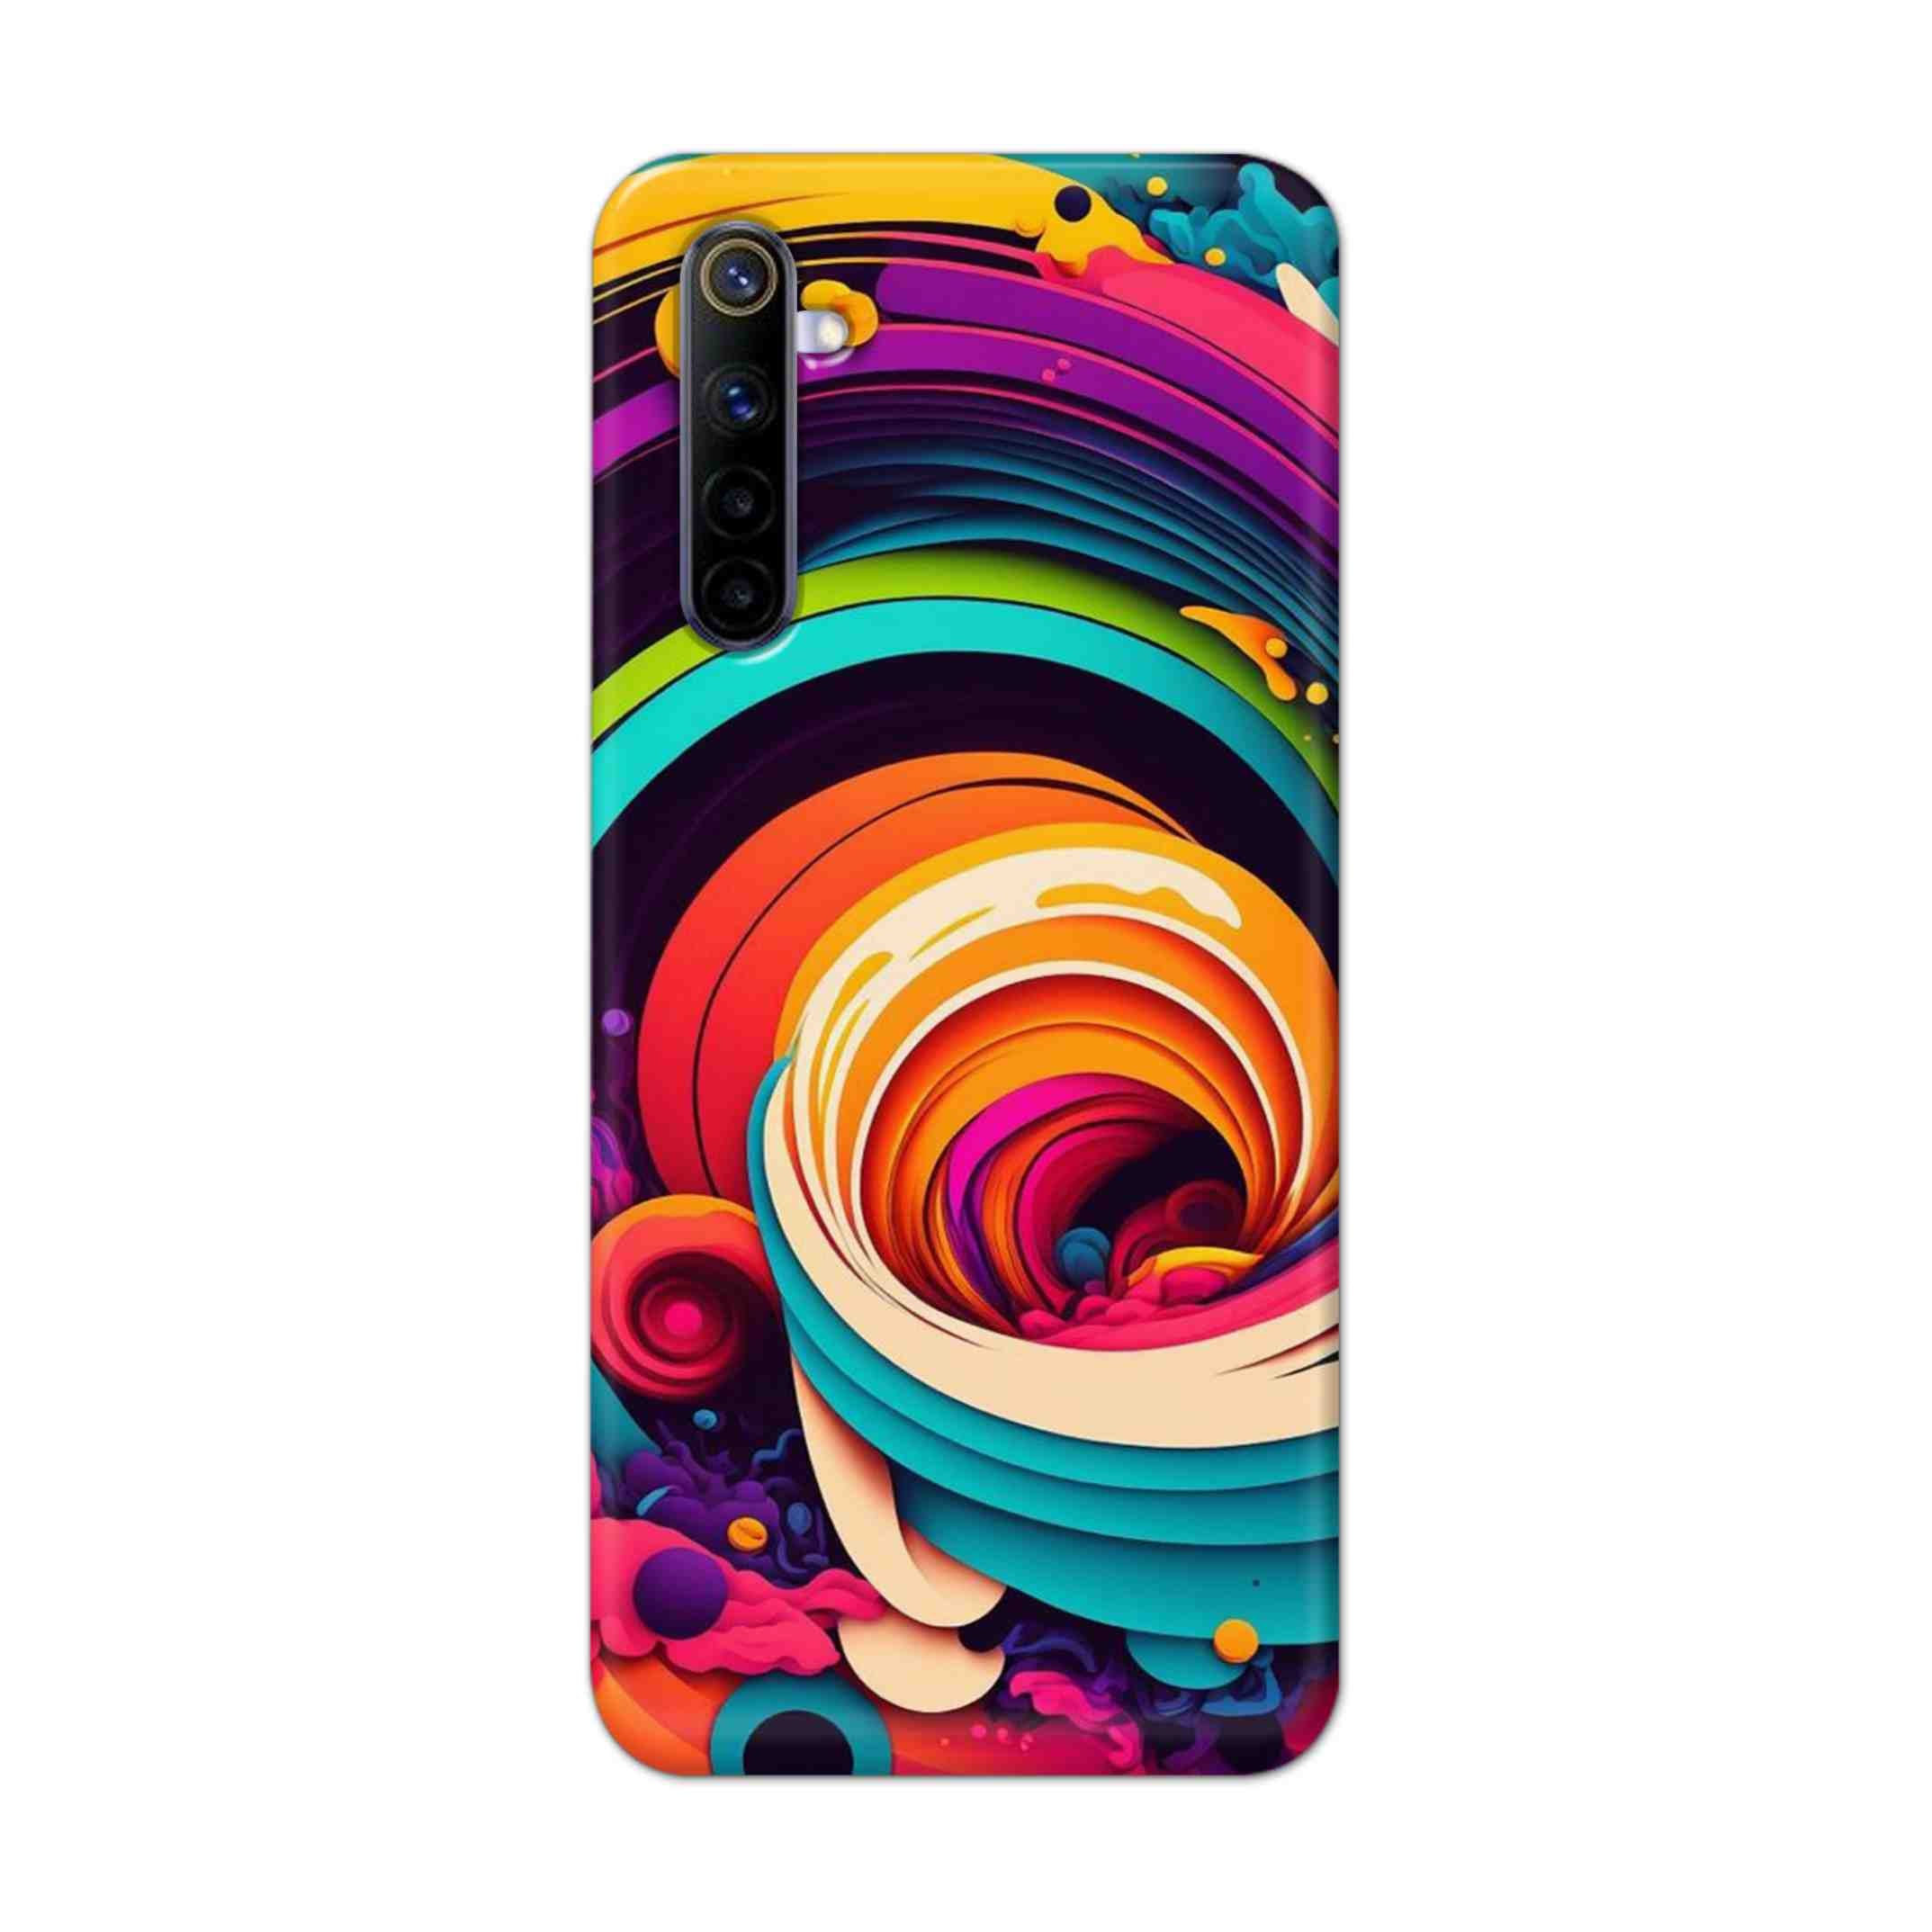 Buy Colour Circle Hard Back Mobile Phone Case Cover For REALME 6 Online